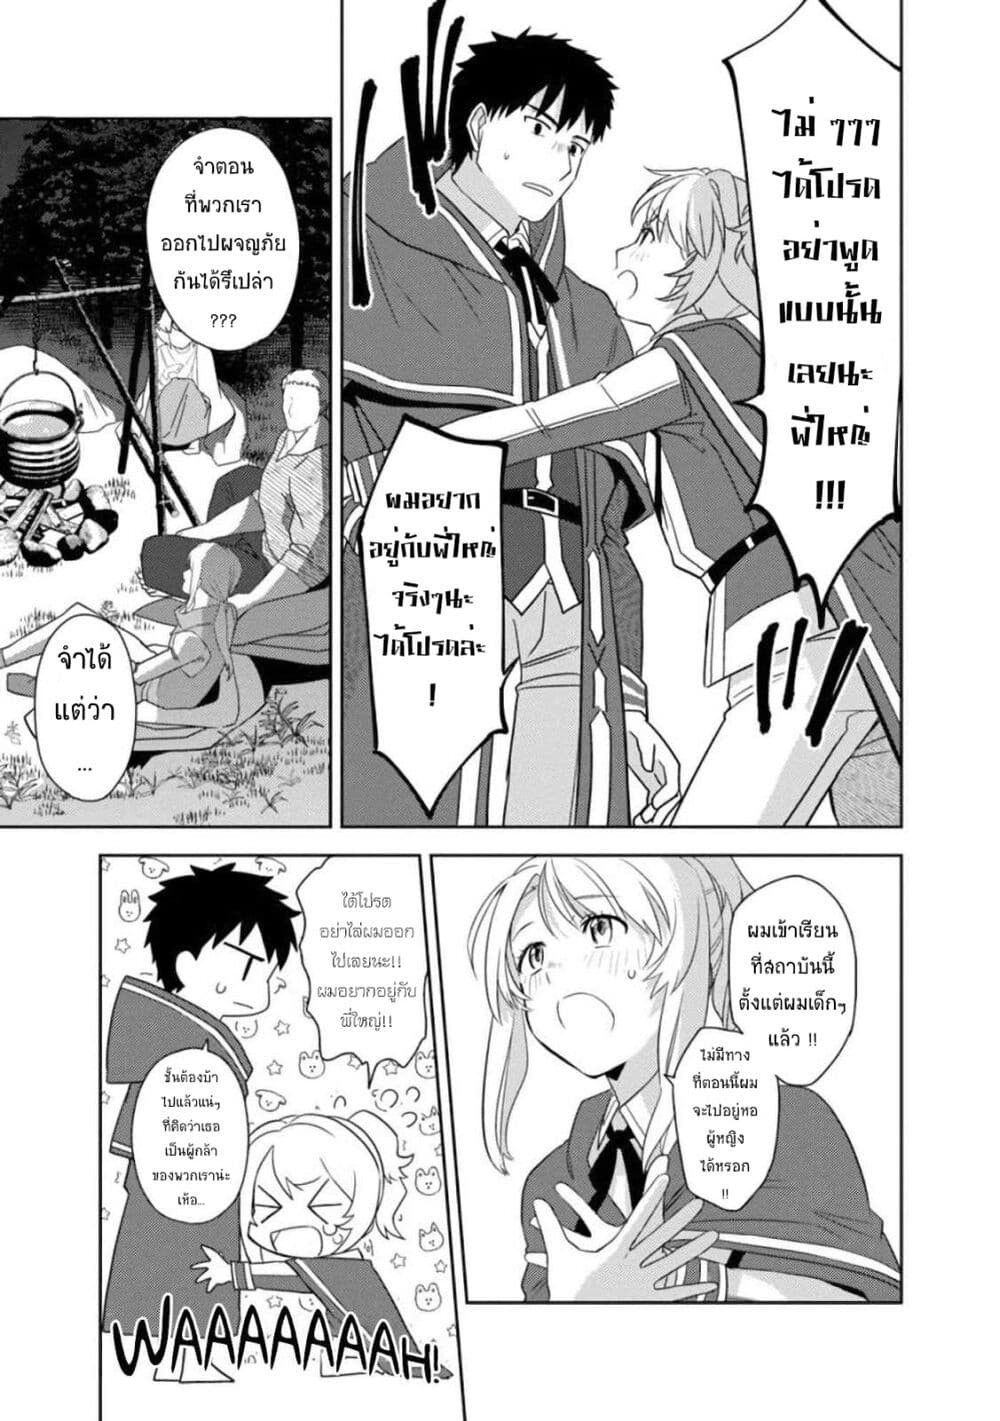 The Reincarnated Swordsman With 9999 Strength Wants to Become a Magician! ตอนที่ 2.2 (3)